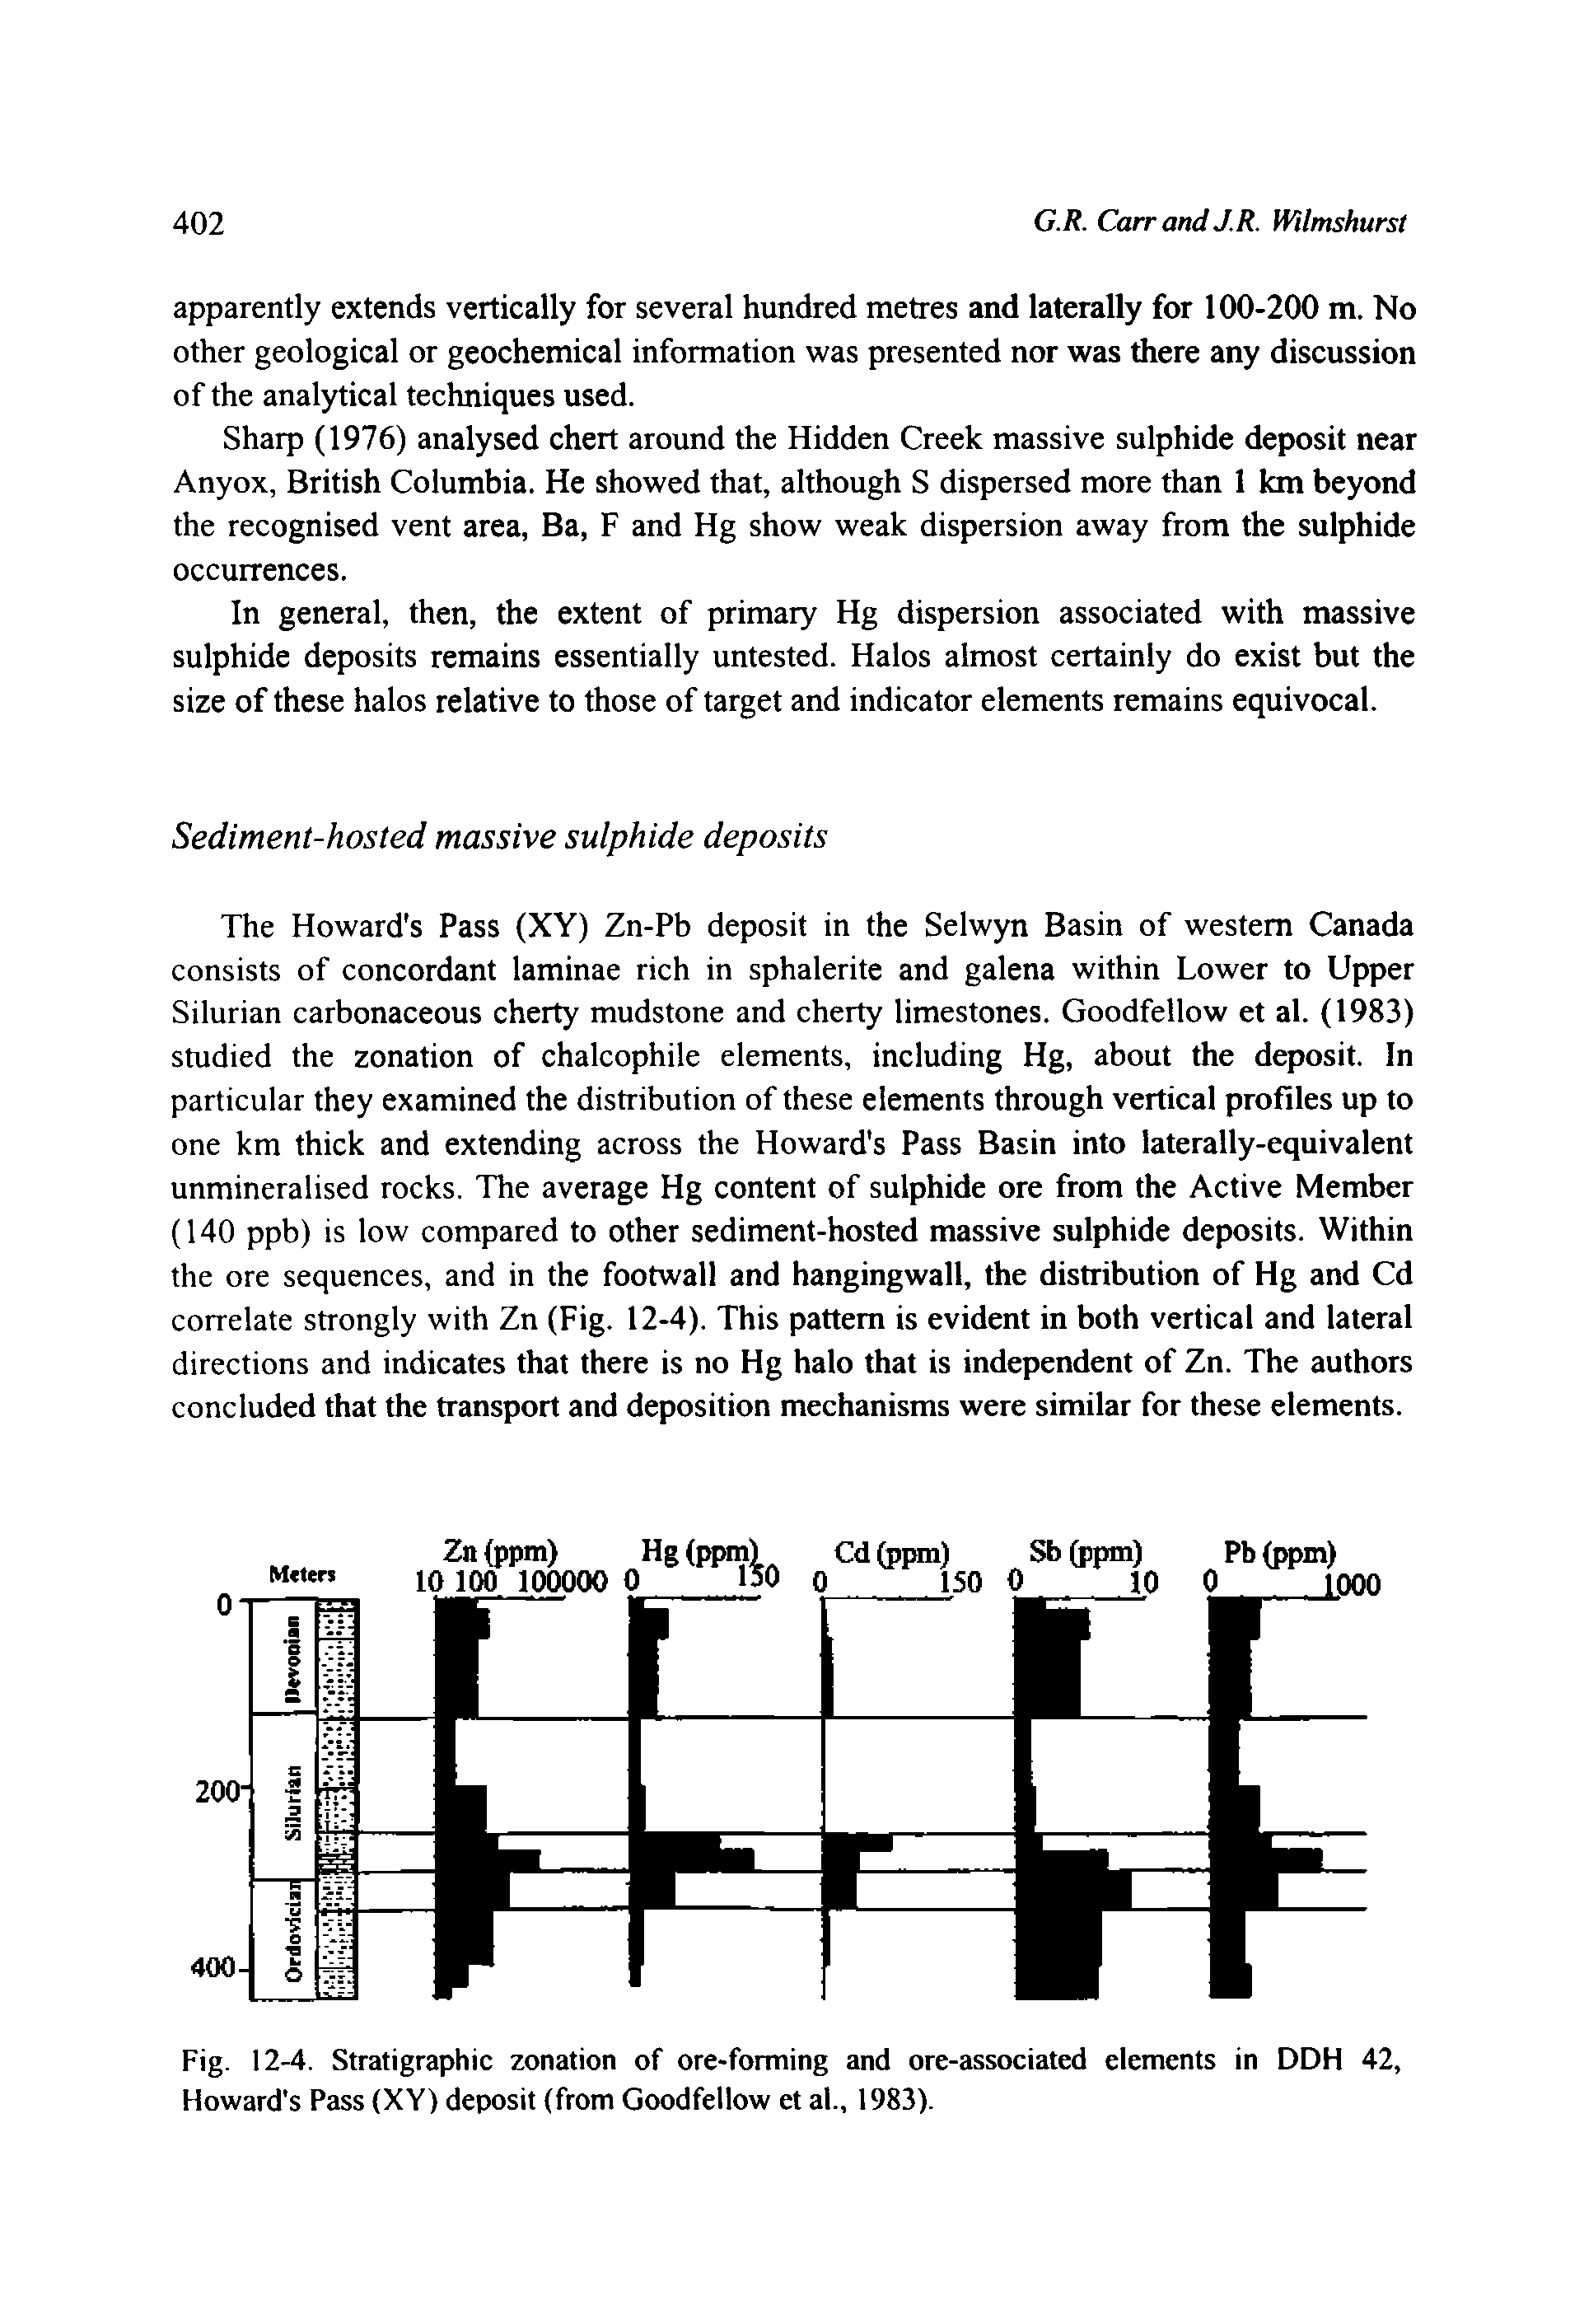 Fig. 12-4. Stratigraphic zonation of ore-forming and ore-associated elements in DDH 42, Howard s Pass (XY) deposit (from Goodfellow et al., 1983).